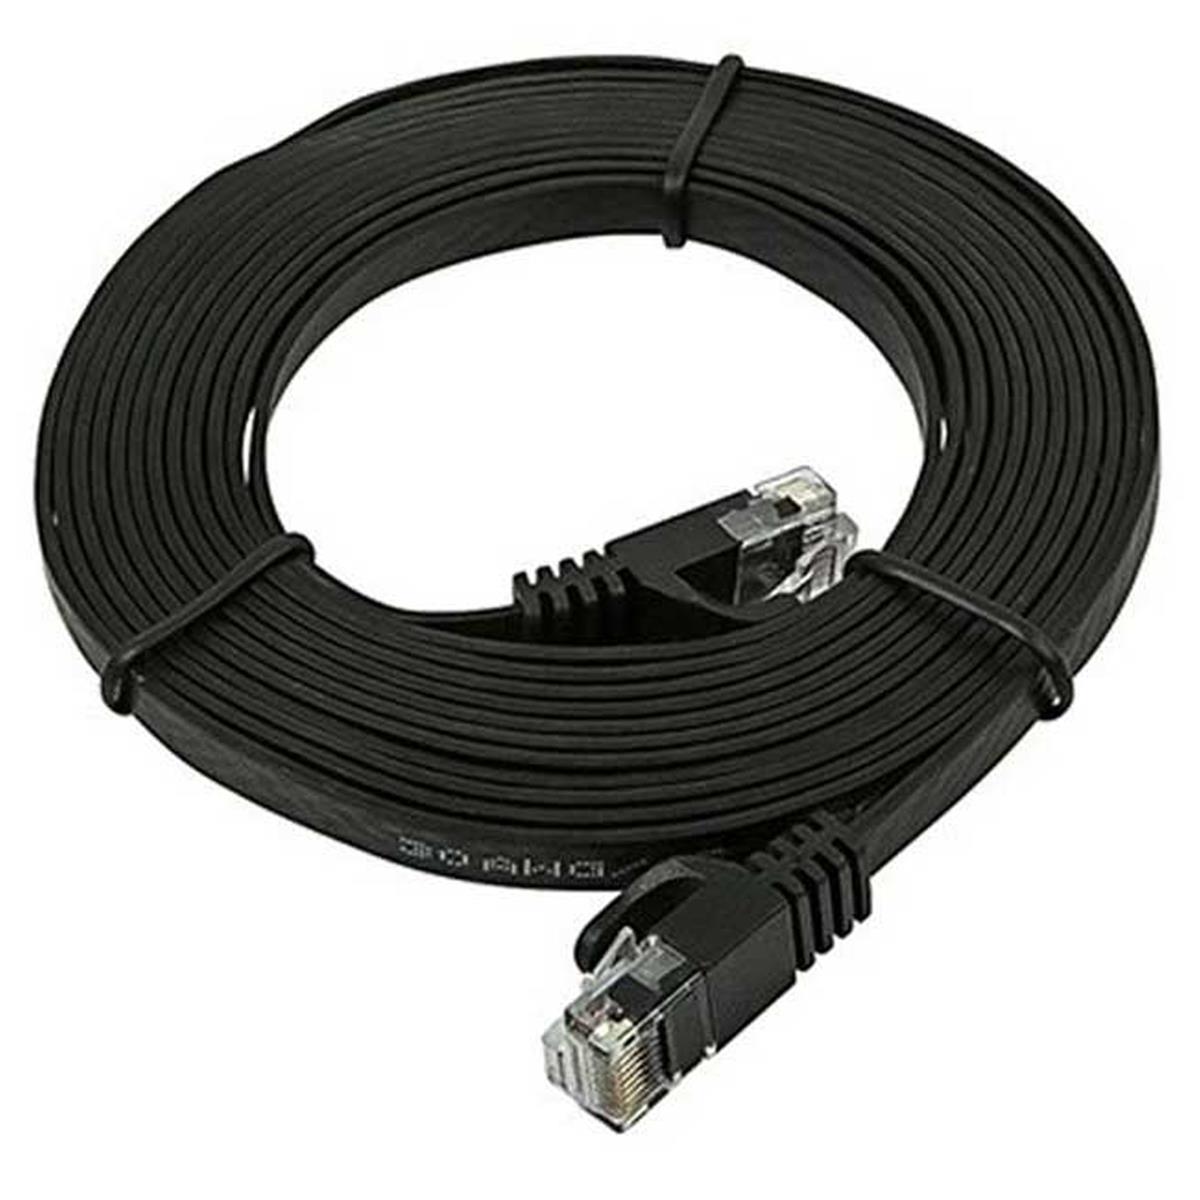 Image of Quasar Science 1' Cat-5 Cable with RJ45 Connectors